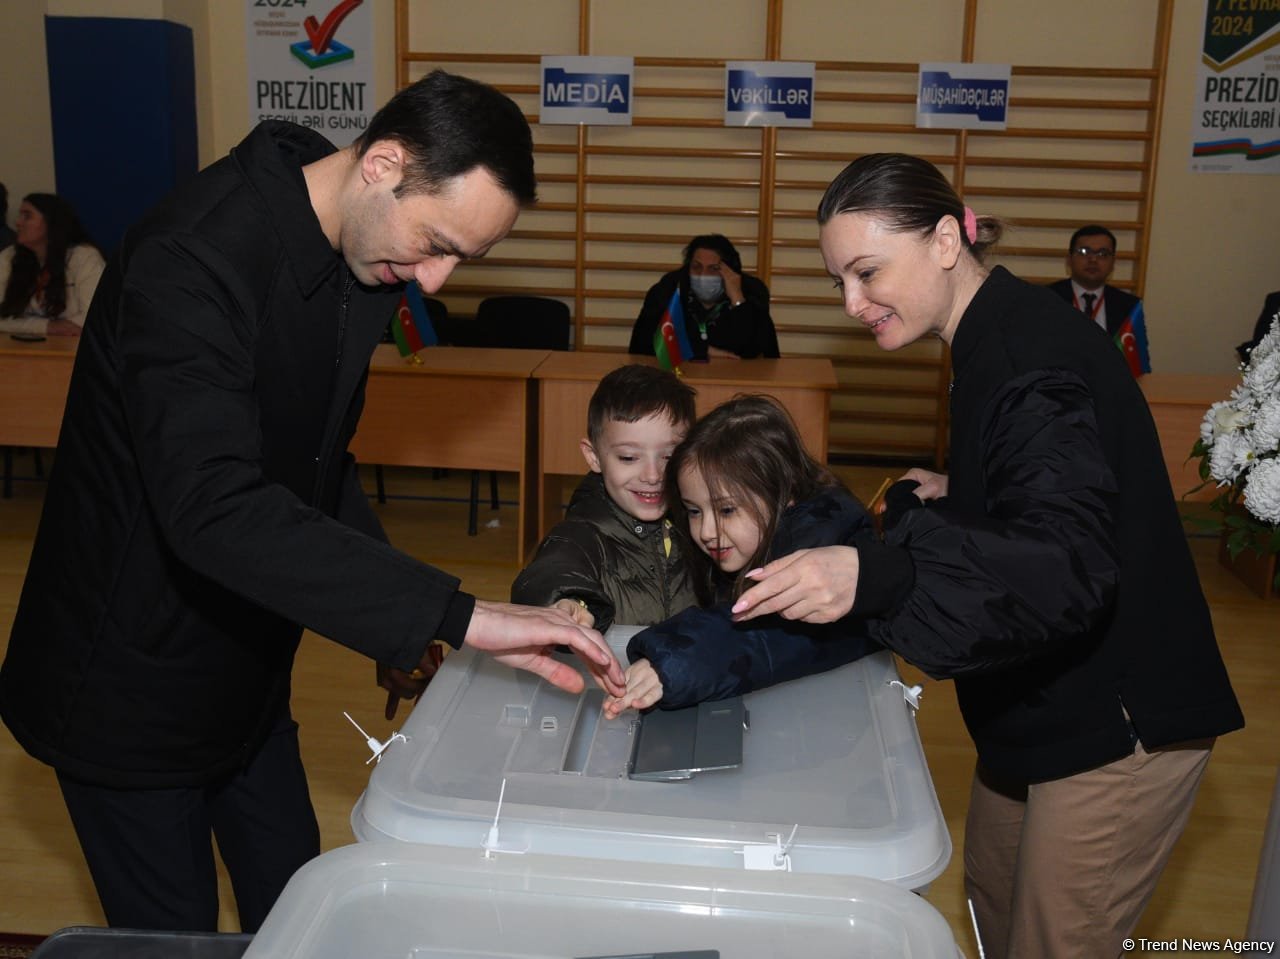 Voters flocking to polling stations established at School No. 132-134 in Baku (PHOTO/VIDEO)